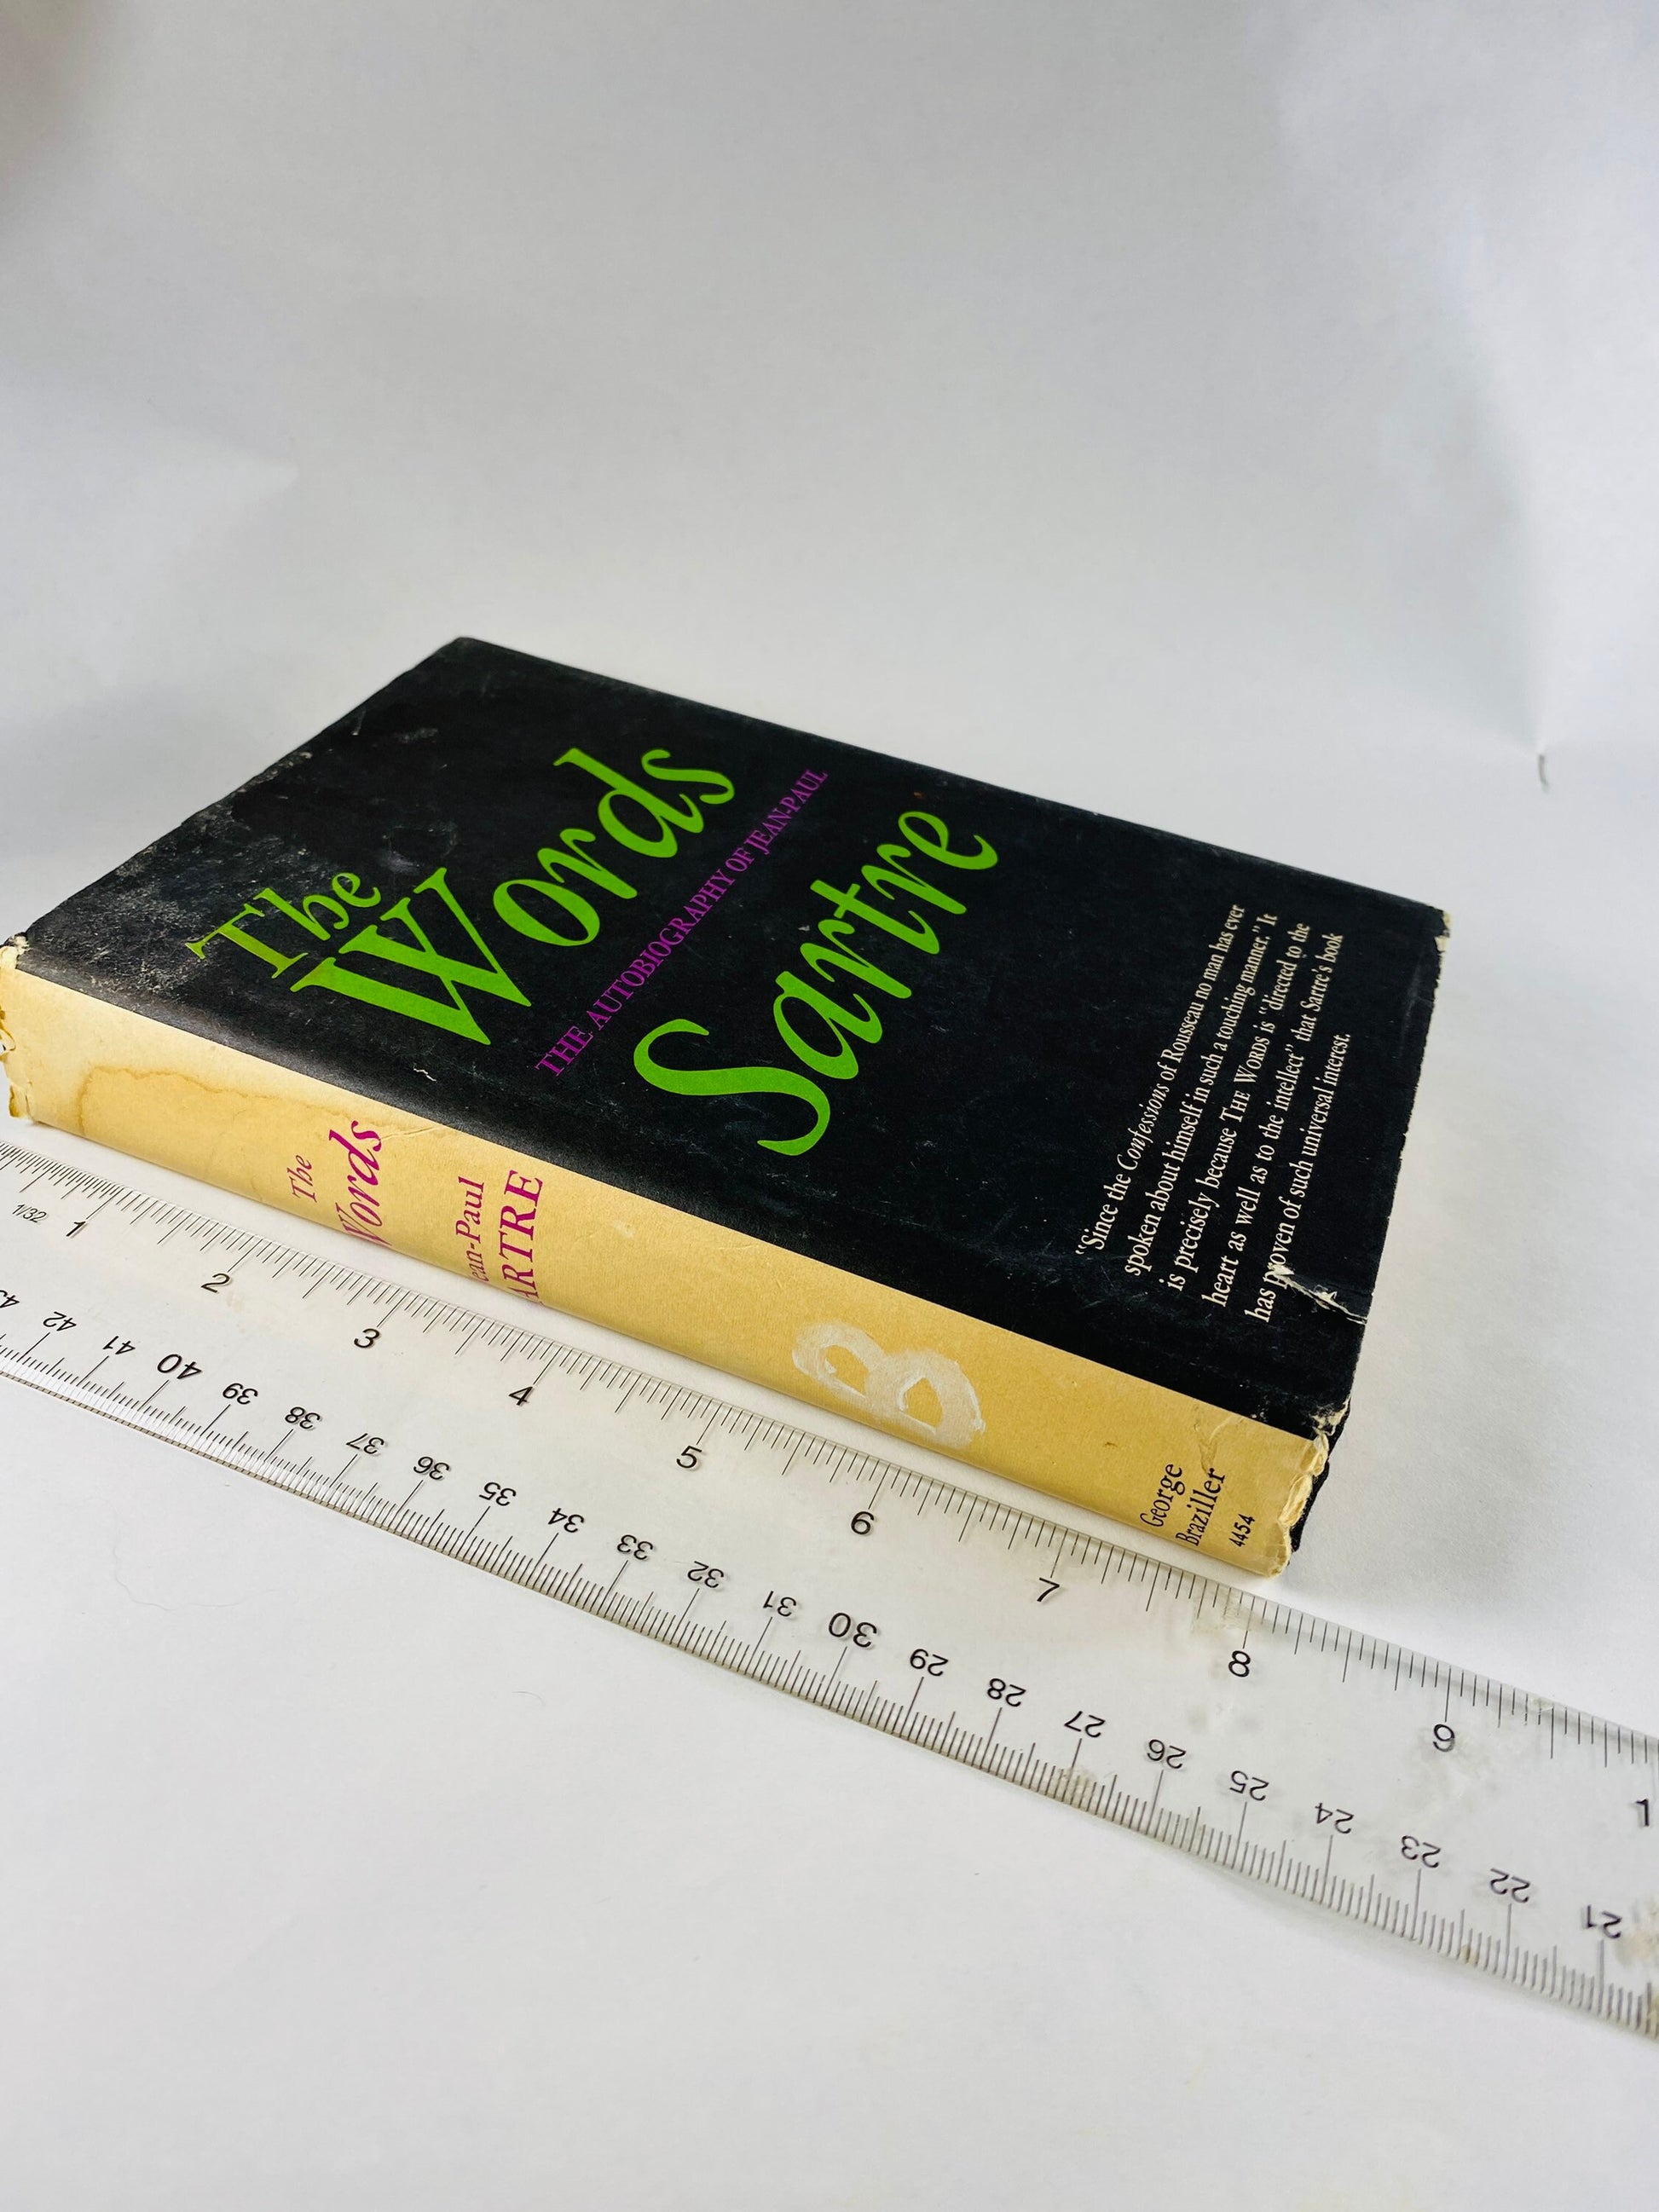 1964 The Words book by Jean-Paul Sartre Vintage Autobiography EARLY PRINTING philosophy novelist playwright. Self analysis